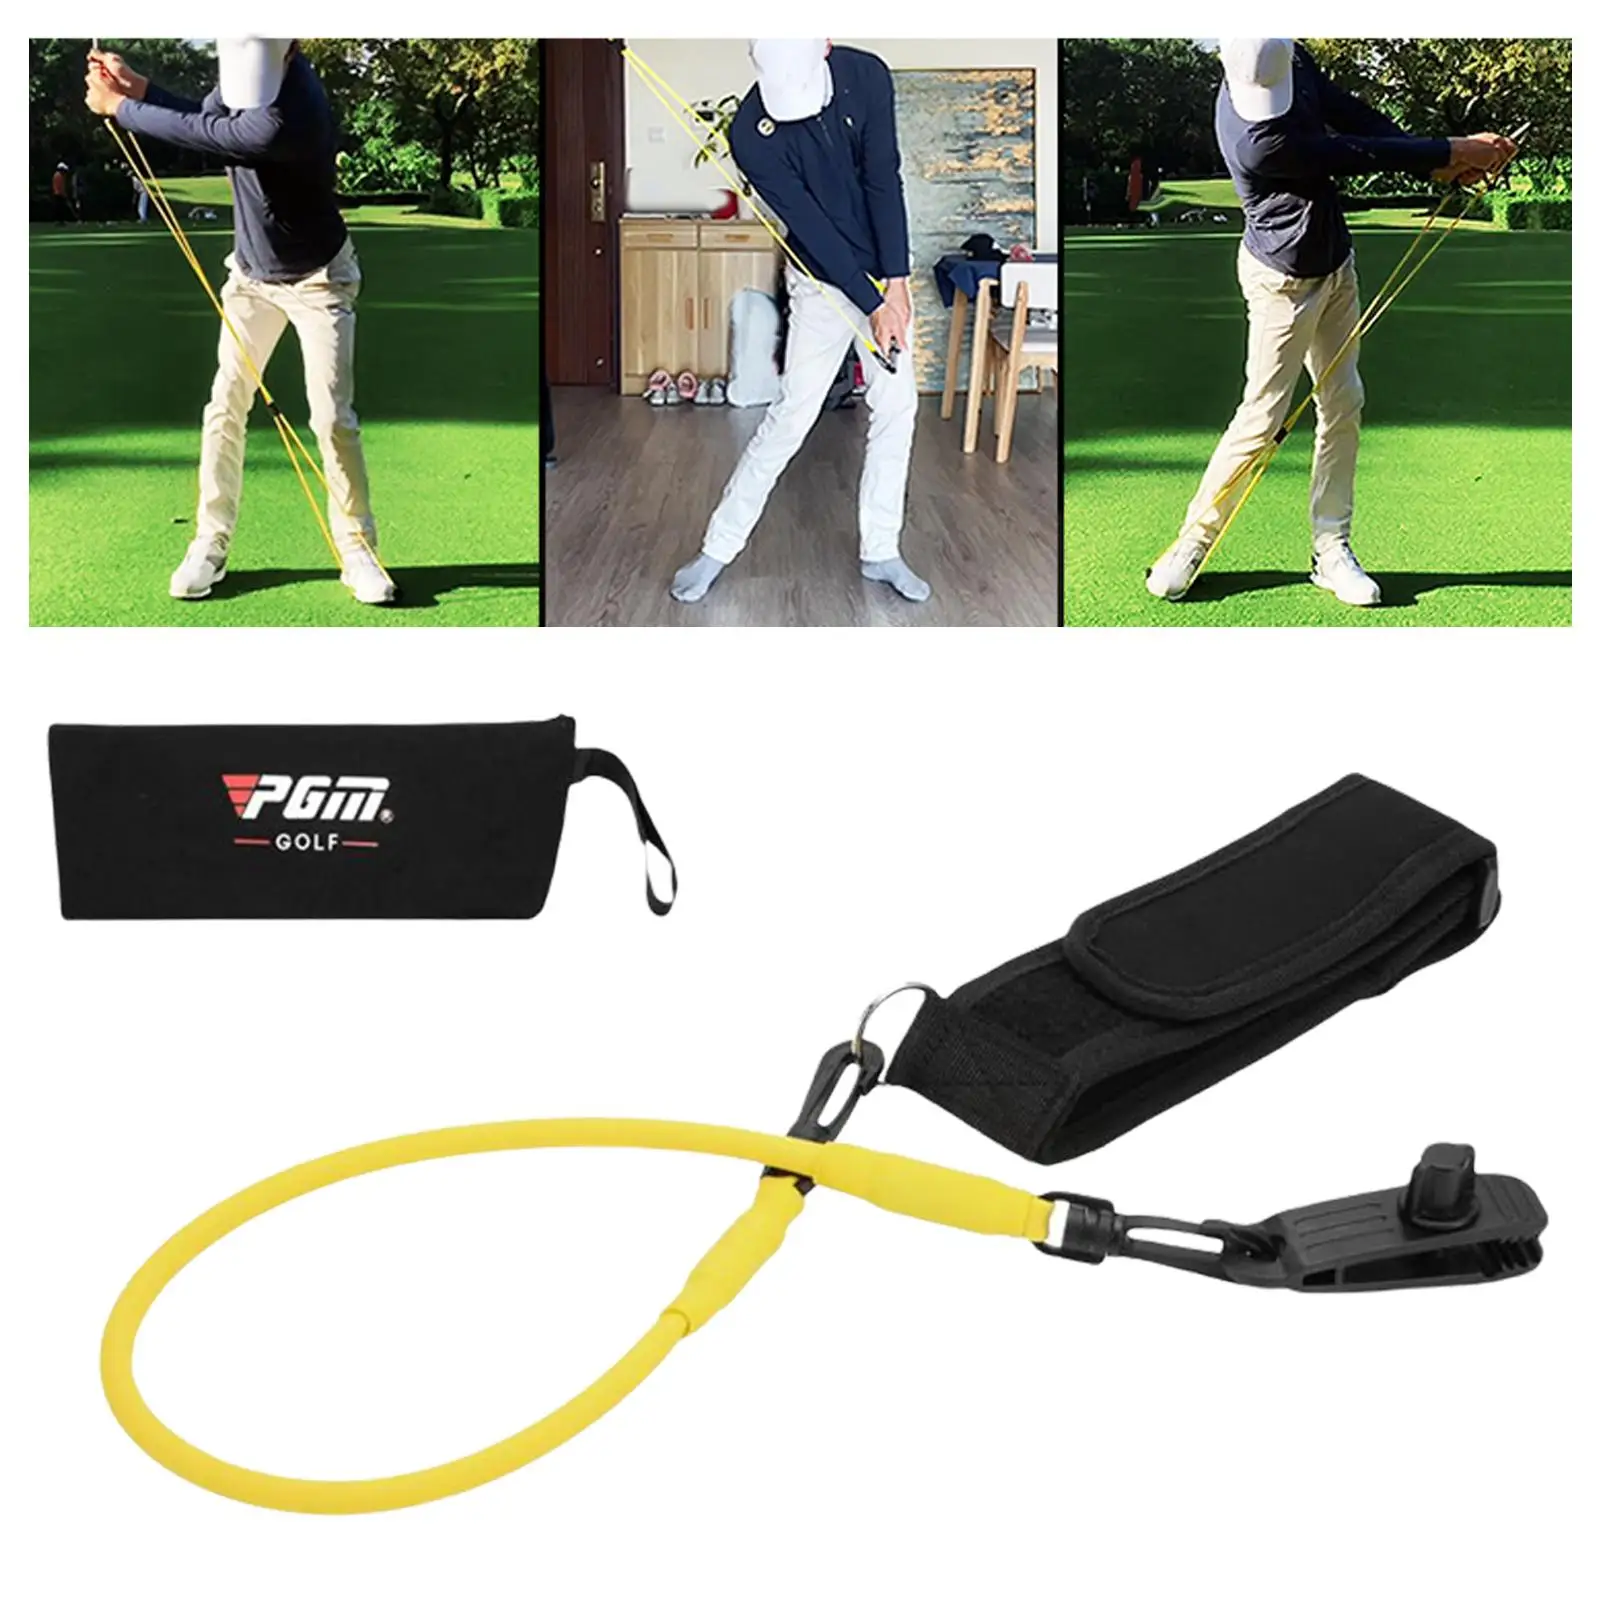 Golf Swing Trainer Arm Waist Band Elastic Resistance Rope Belt Posture Guide Training Correcting for Golfers